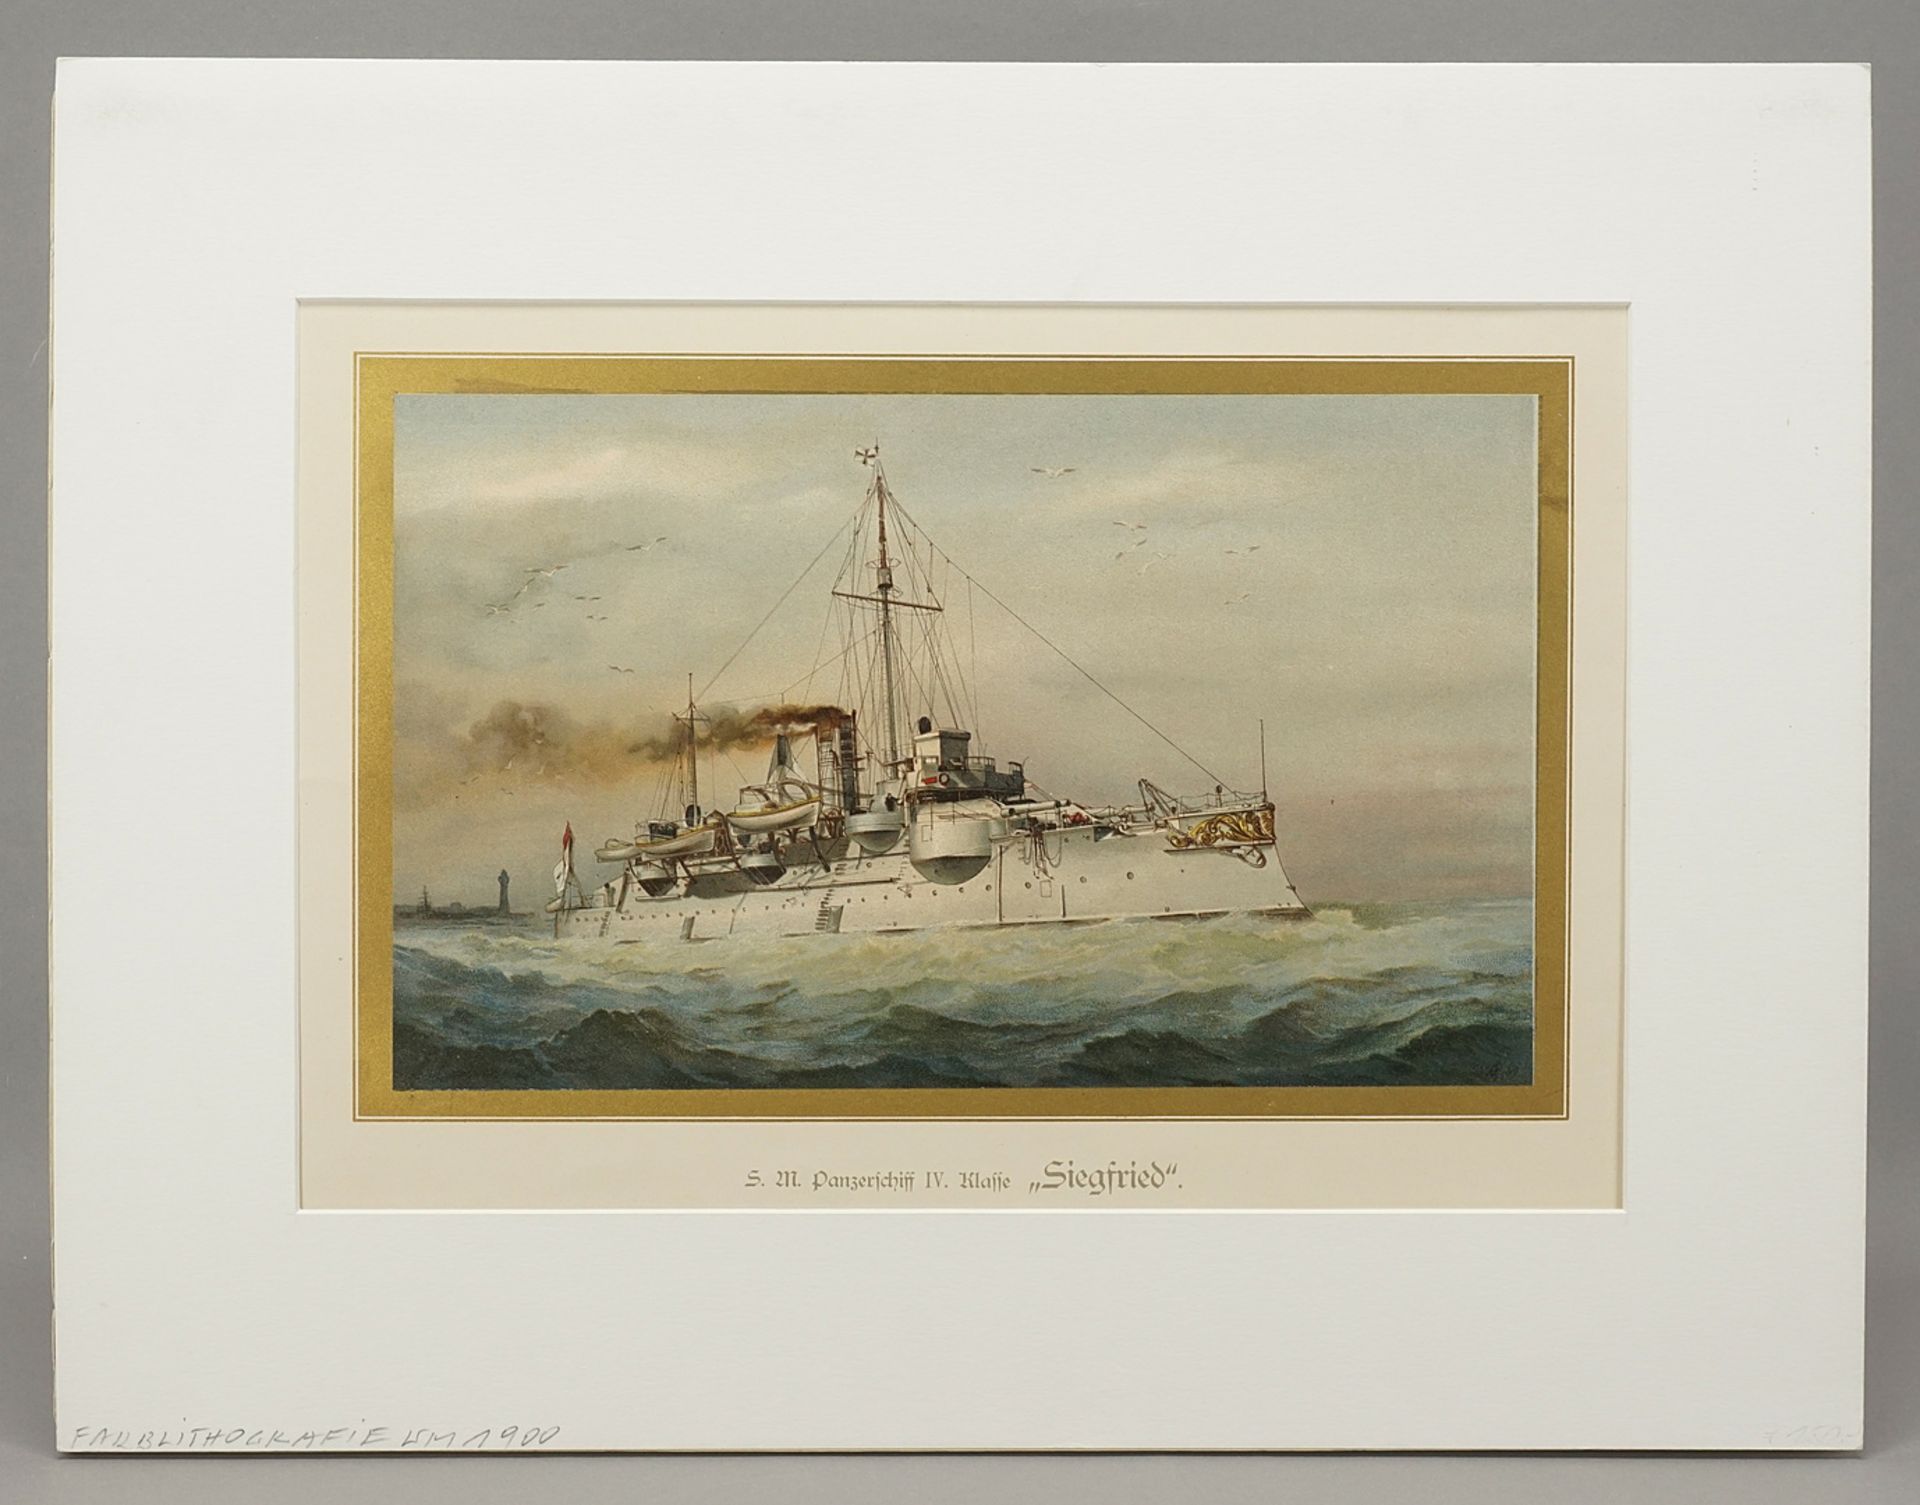 S.M. Ironclad "Siegfried" - Image 2 of 3